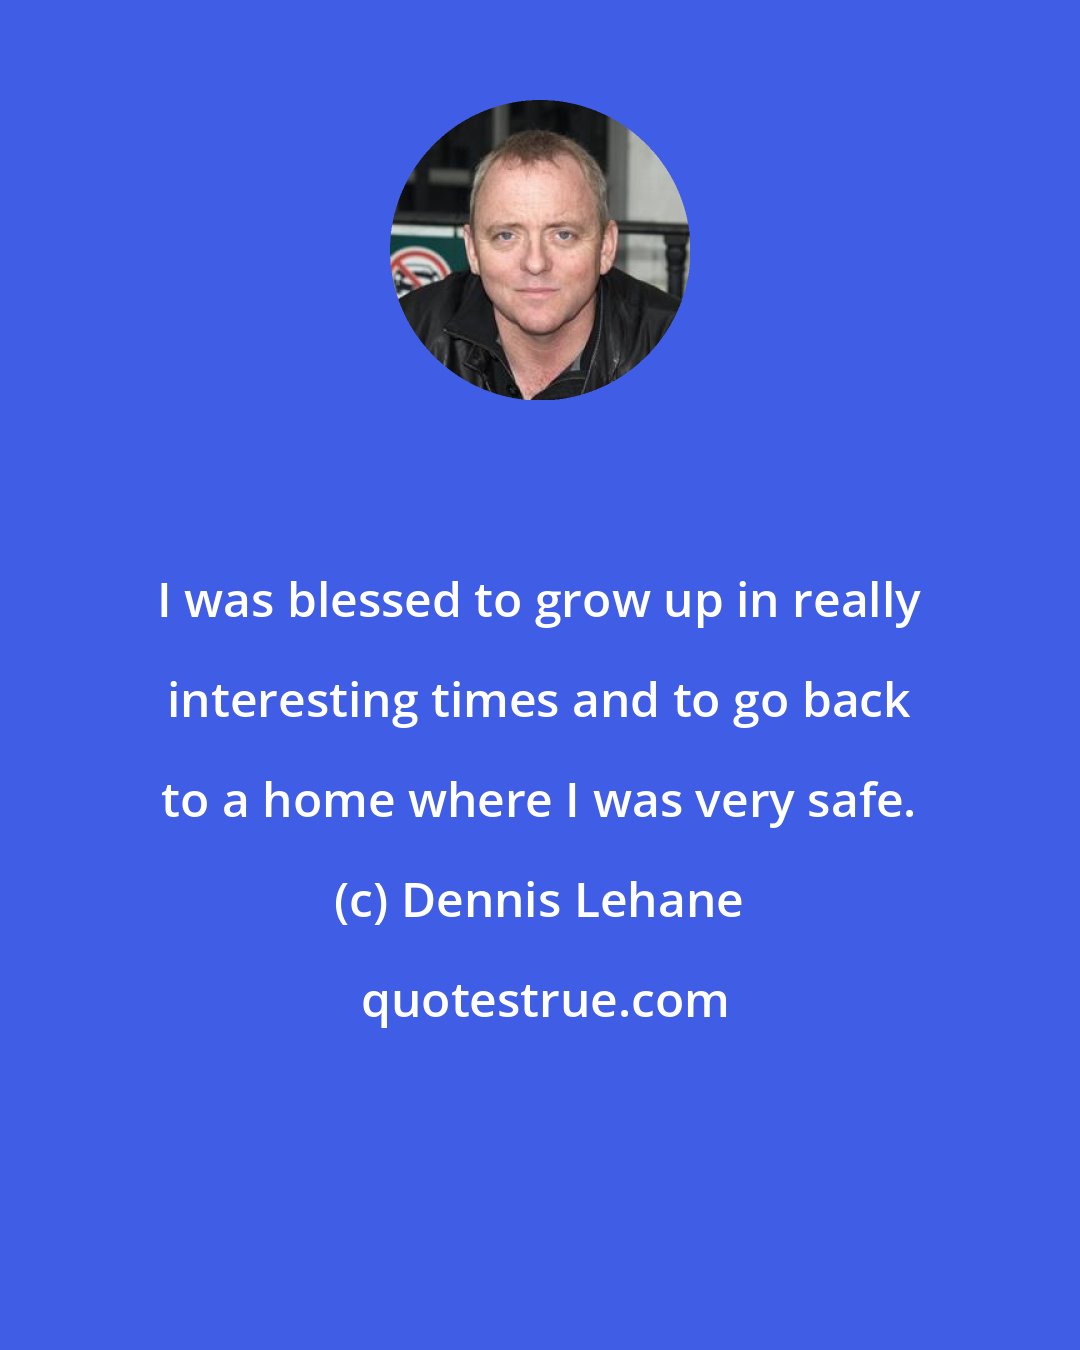 Dennis Lehane: I was blessed to grow up in really interesting times and to go back to a home where I was very safe.